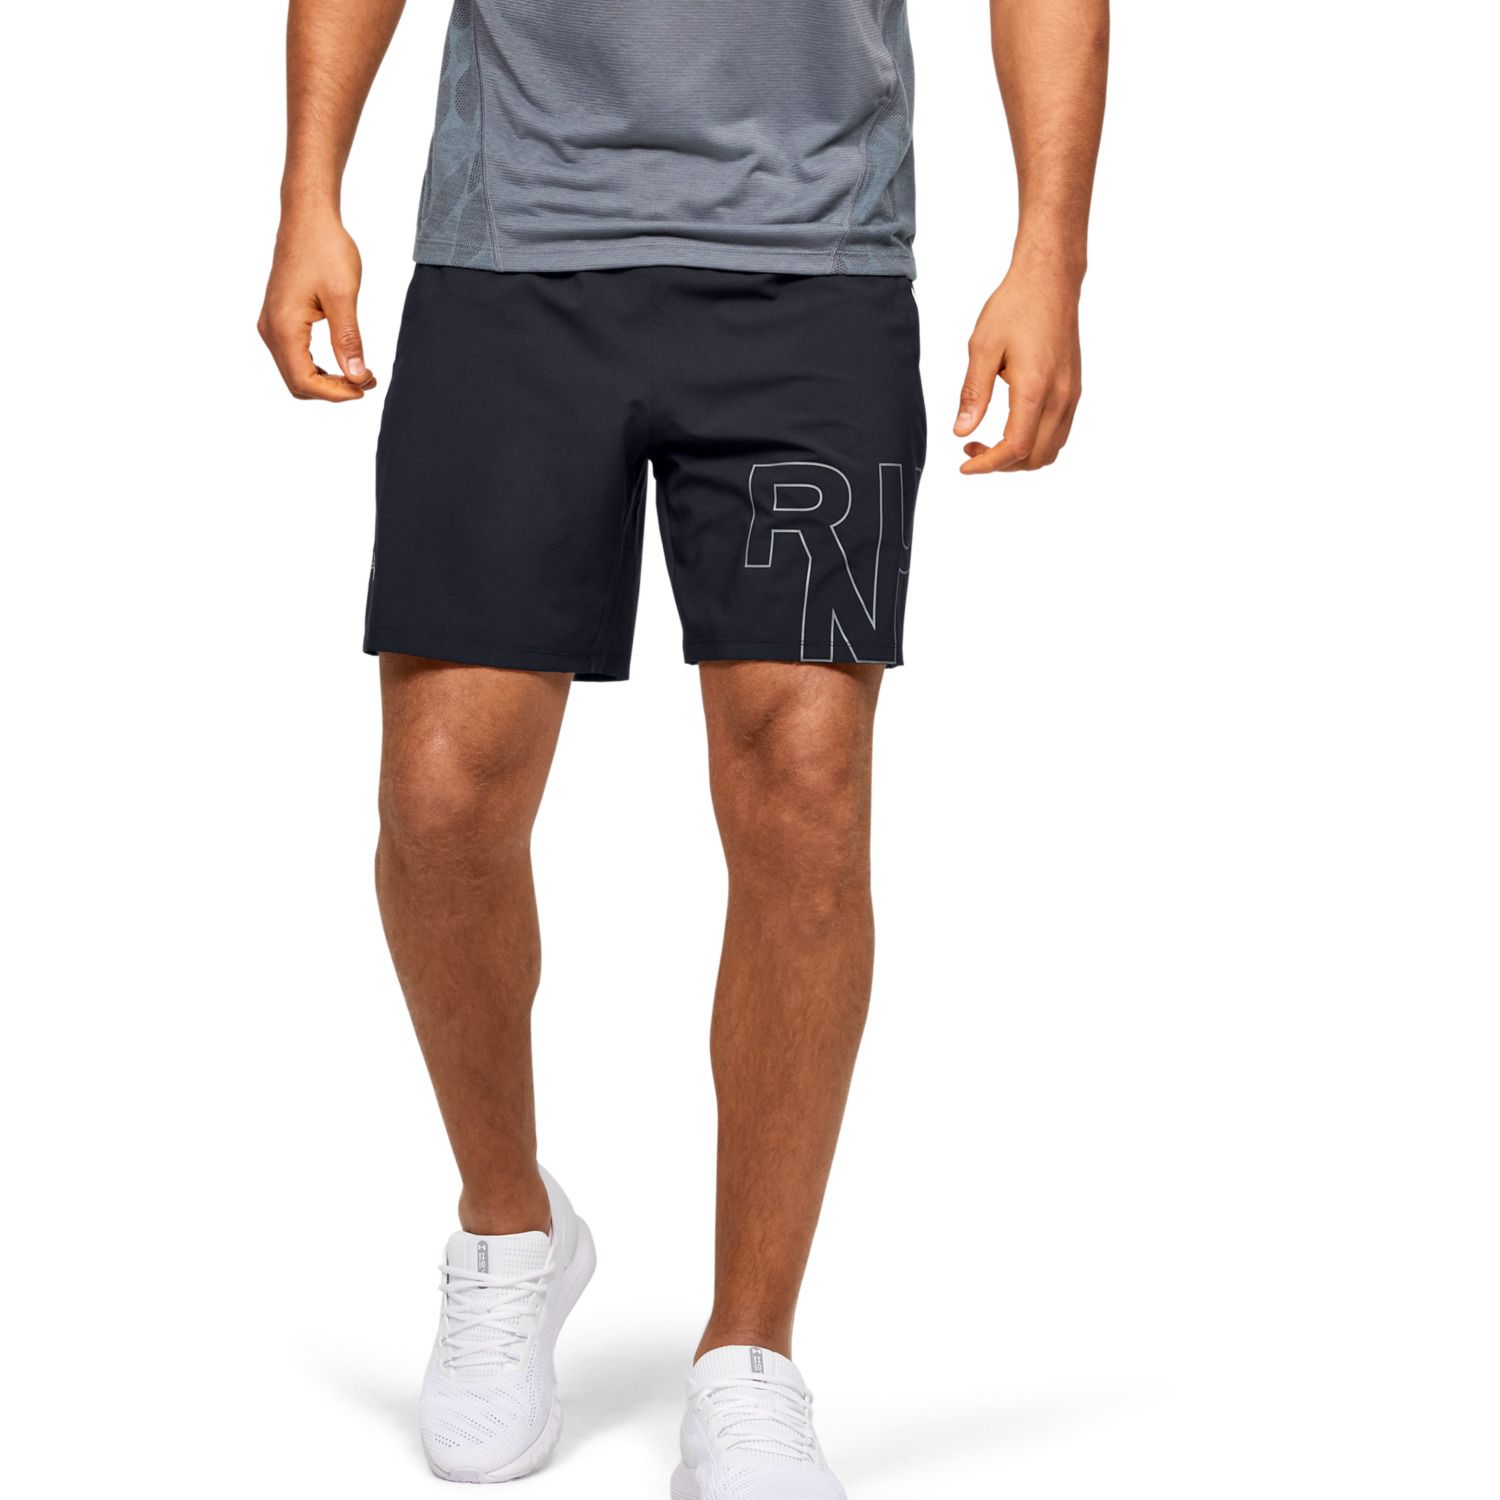 under armour 7 inch shorts